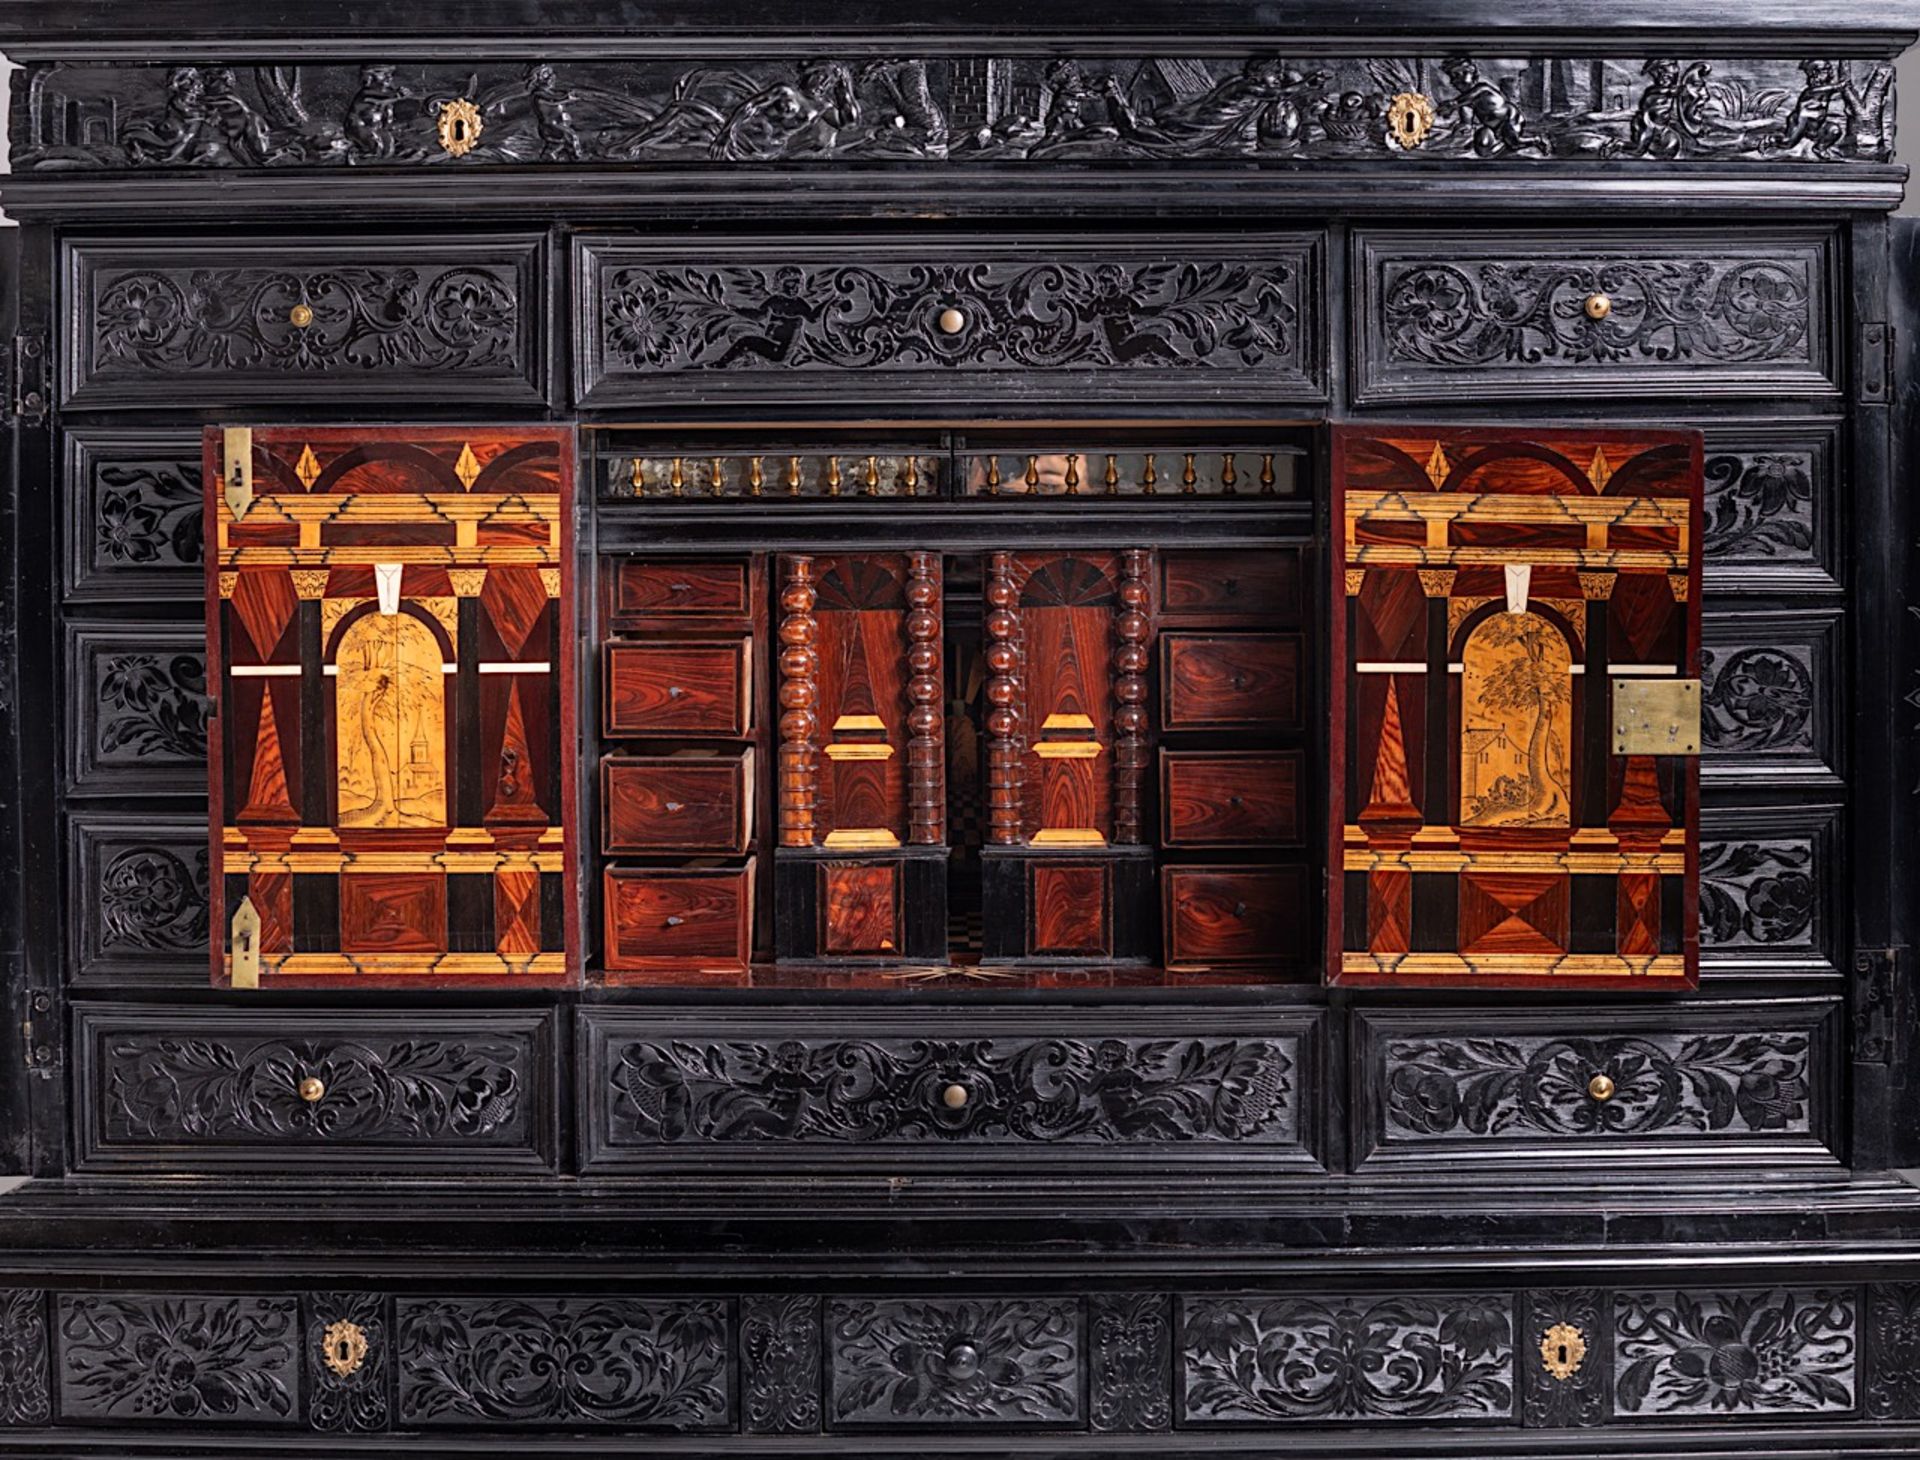 PREMIUM LOT - An exceptional 17thC French ebony and ebonised cabinet-on-stand, H 181,5 - W 163 - D 5 - Bild 9 aus 14